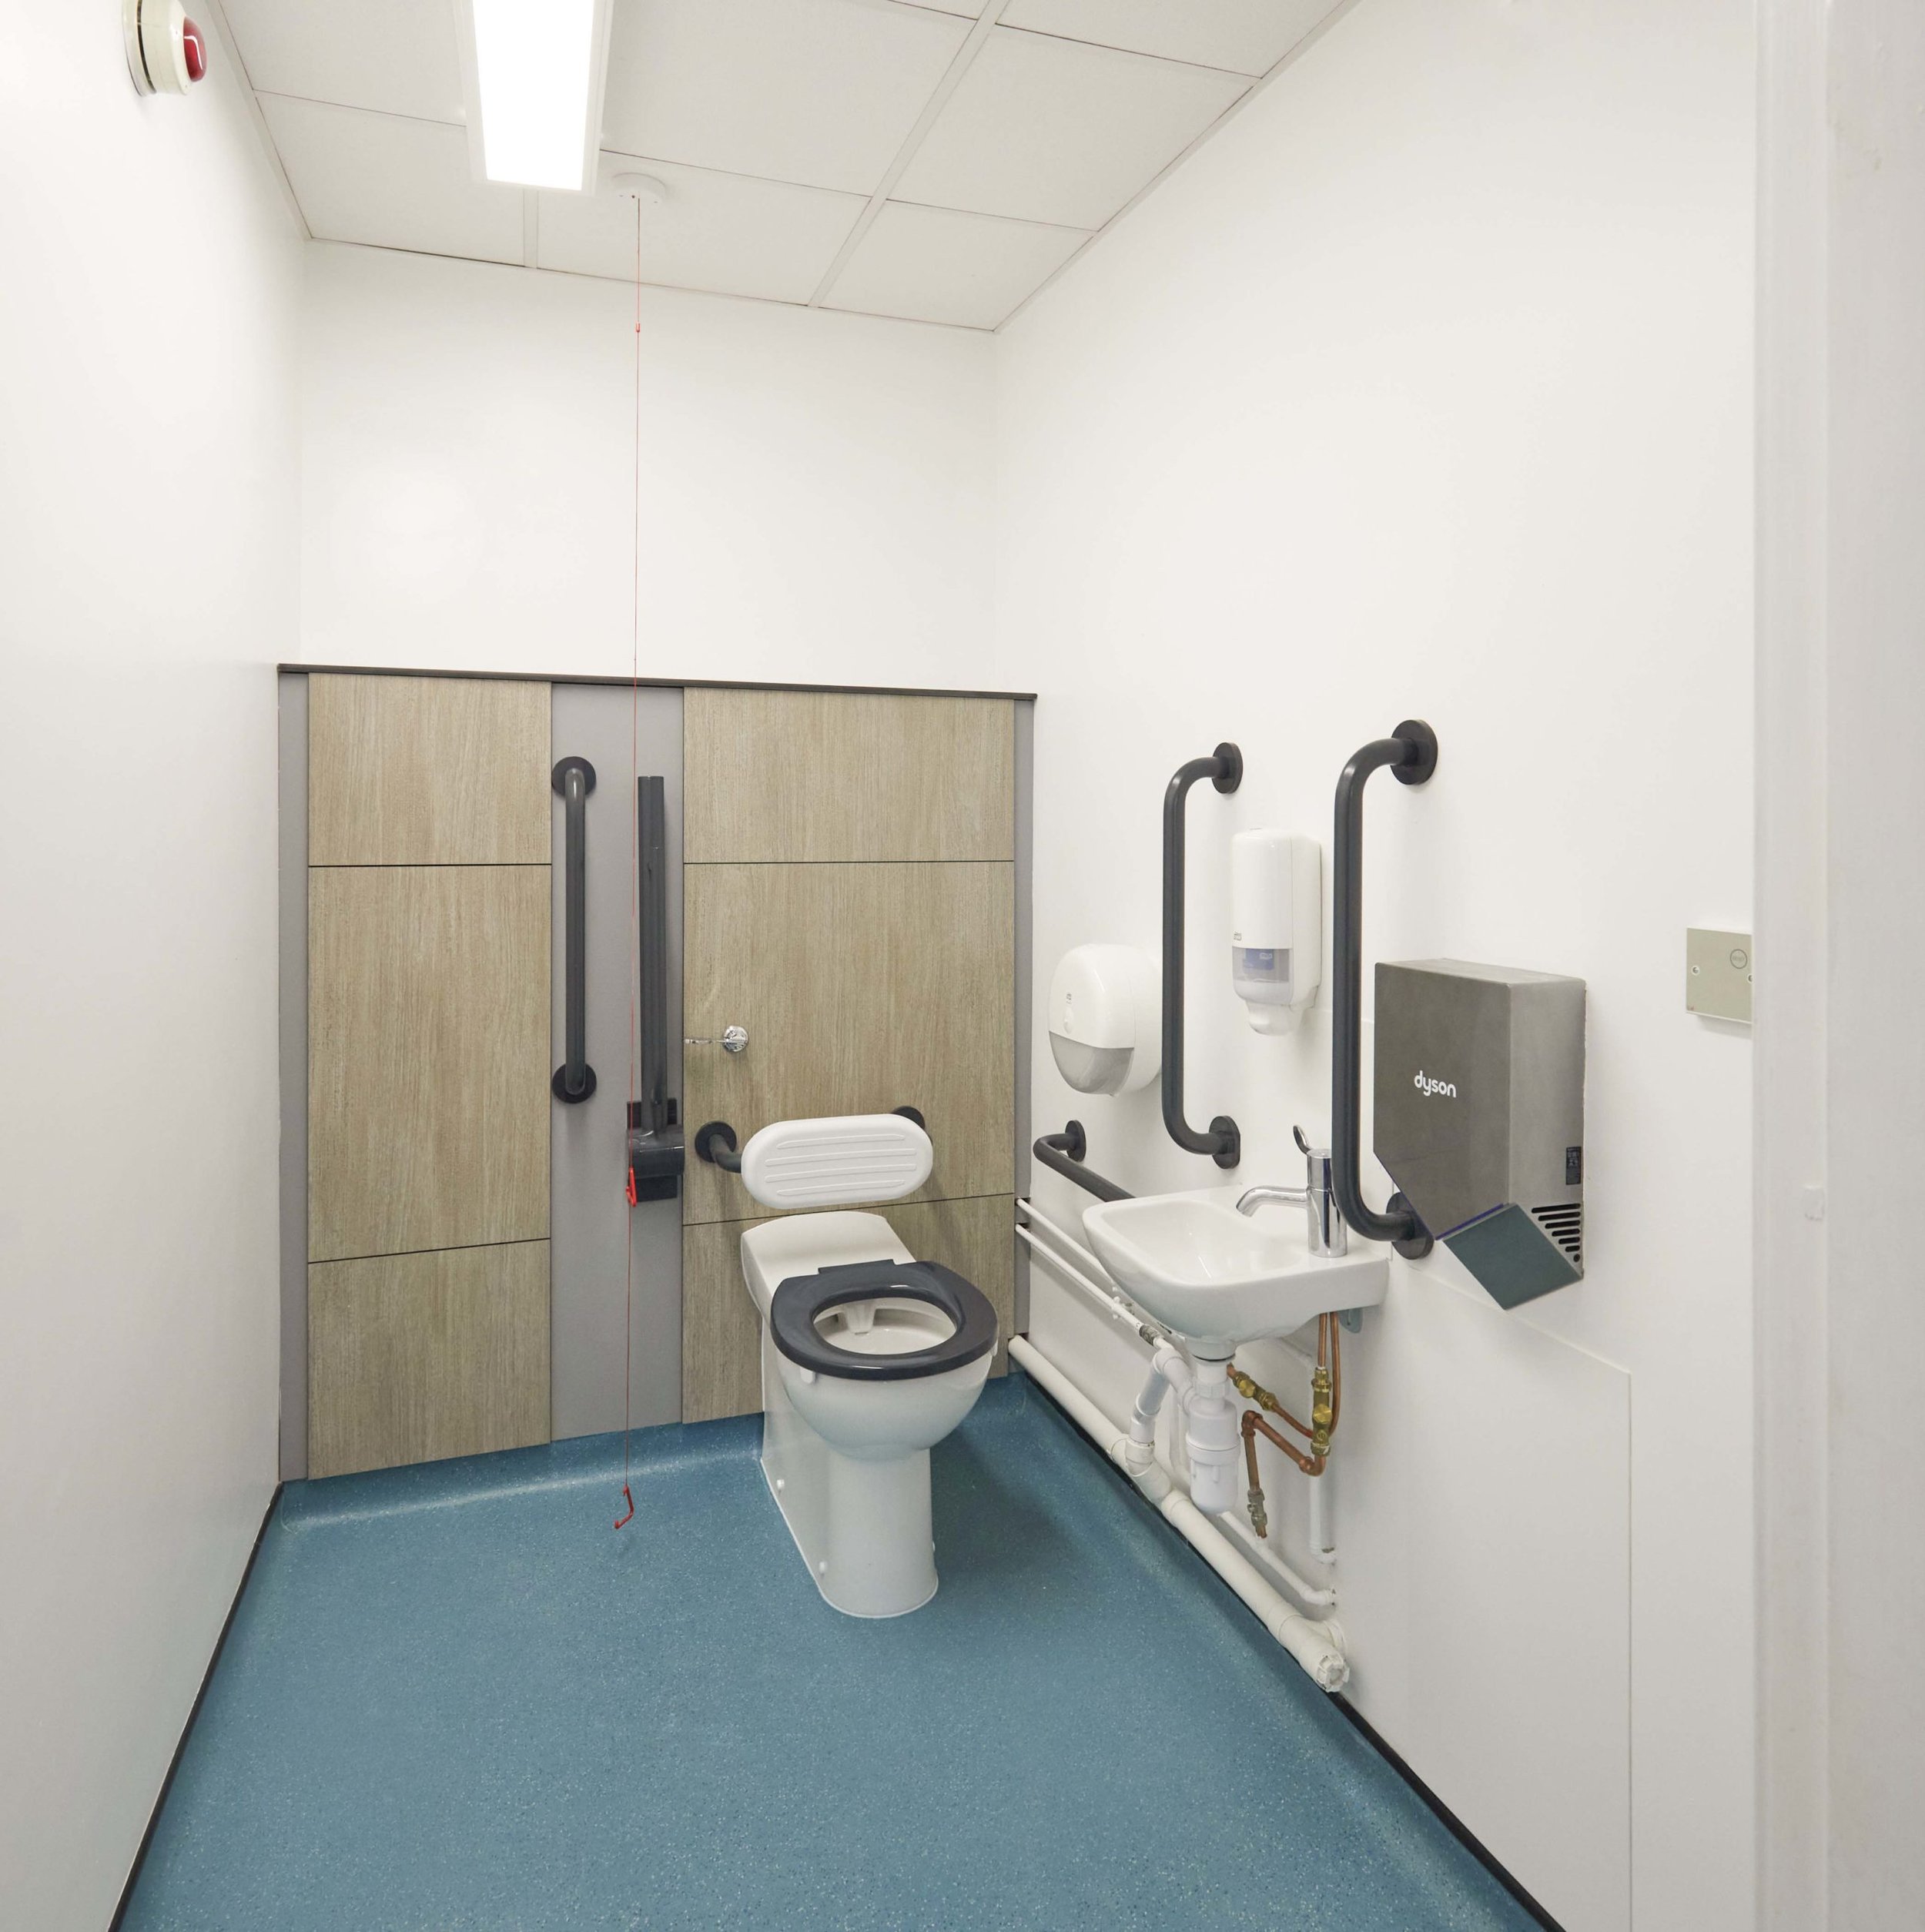 disabled doc m toilet with grey woodgrain ducts a sink, a blue floor and a dyson hand dryer at upland school.jpg